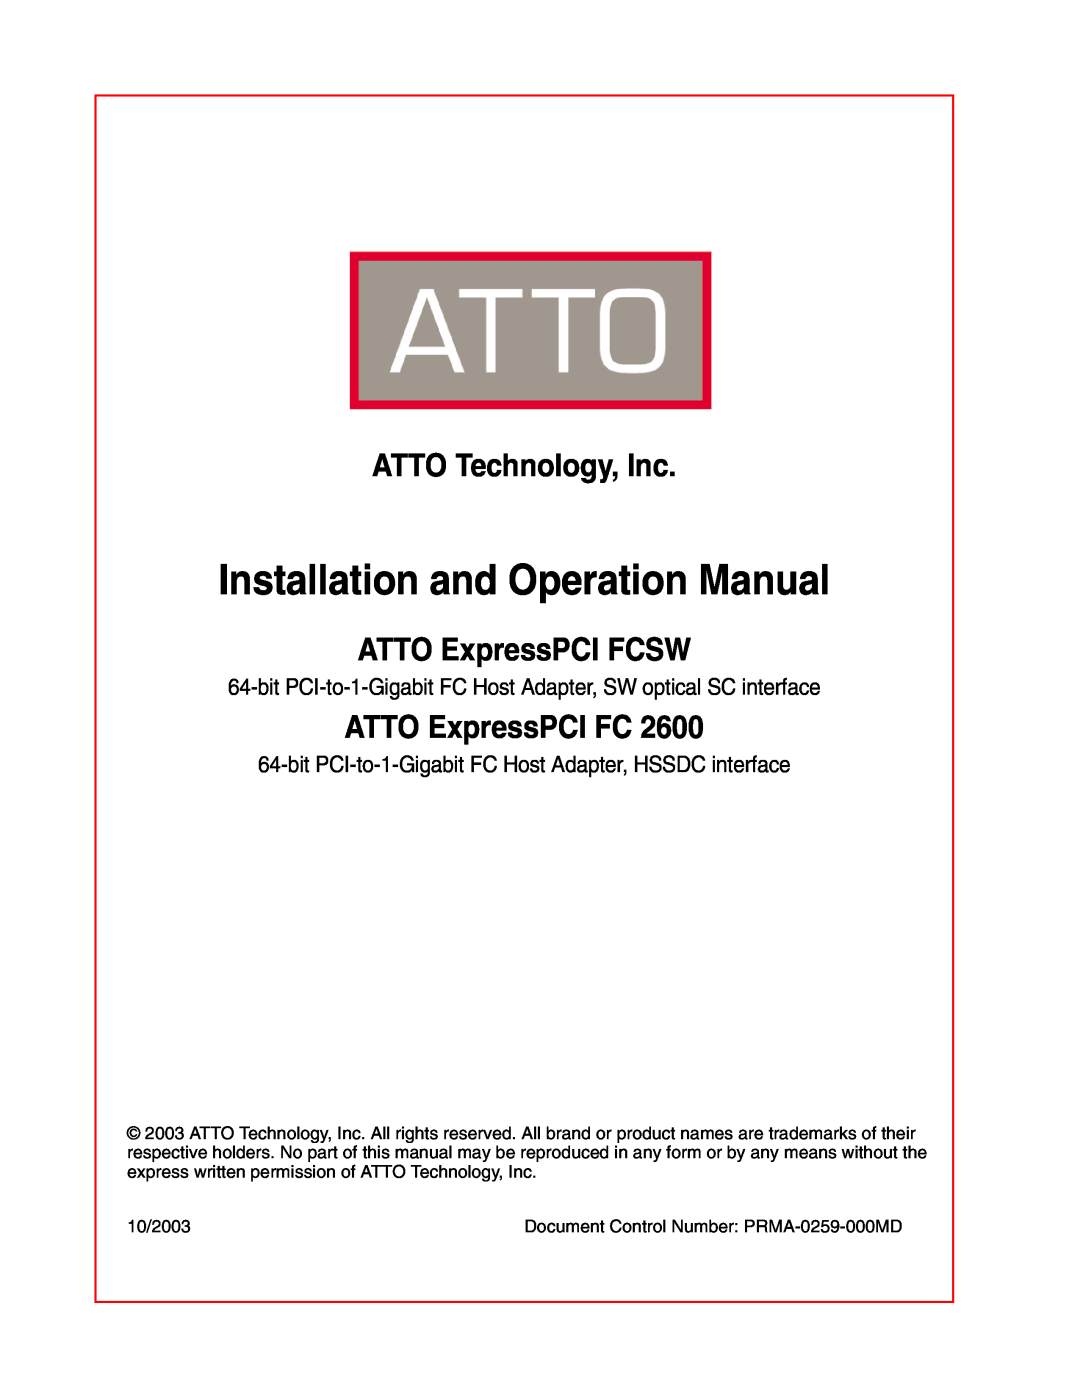 ATTO Technology FC2600 operation manual ATTO Technology, Inc, ATTO ExpressPCI FCSW, Installation and Operation Manual 